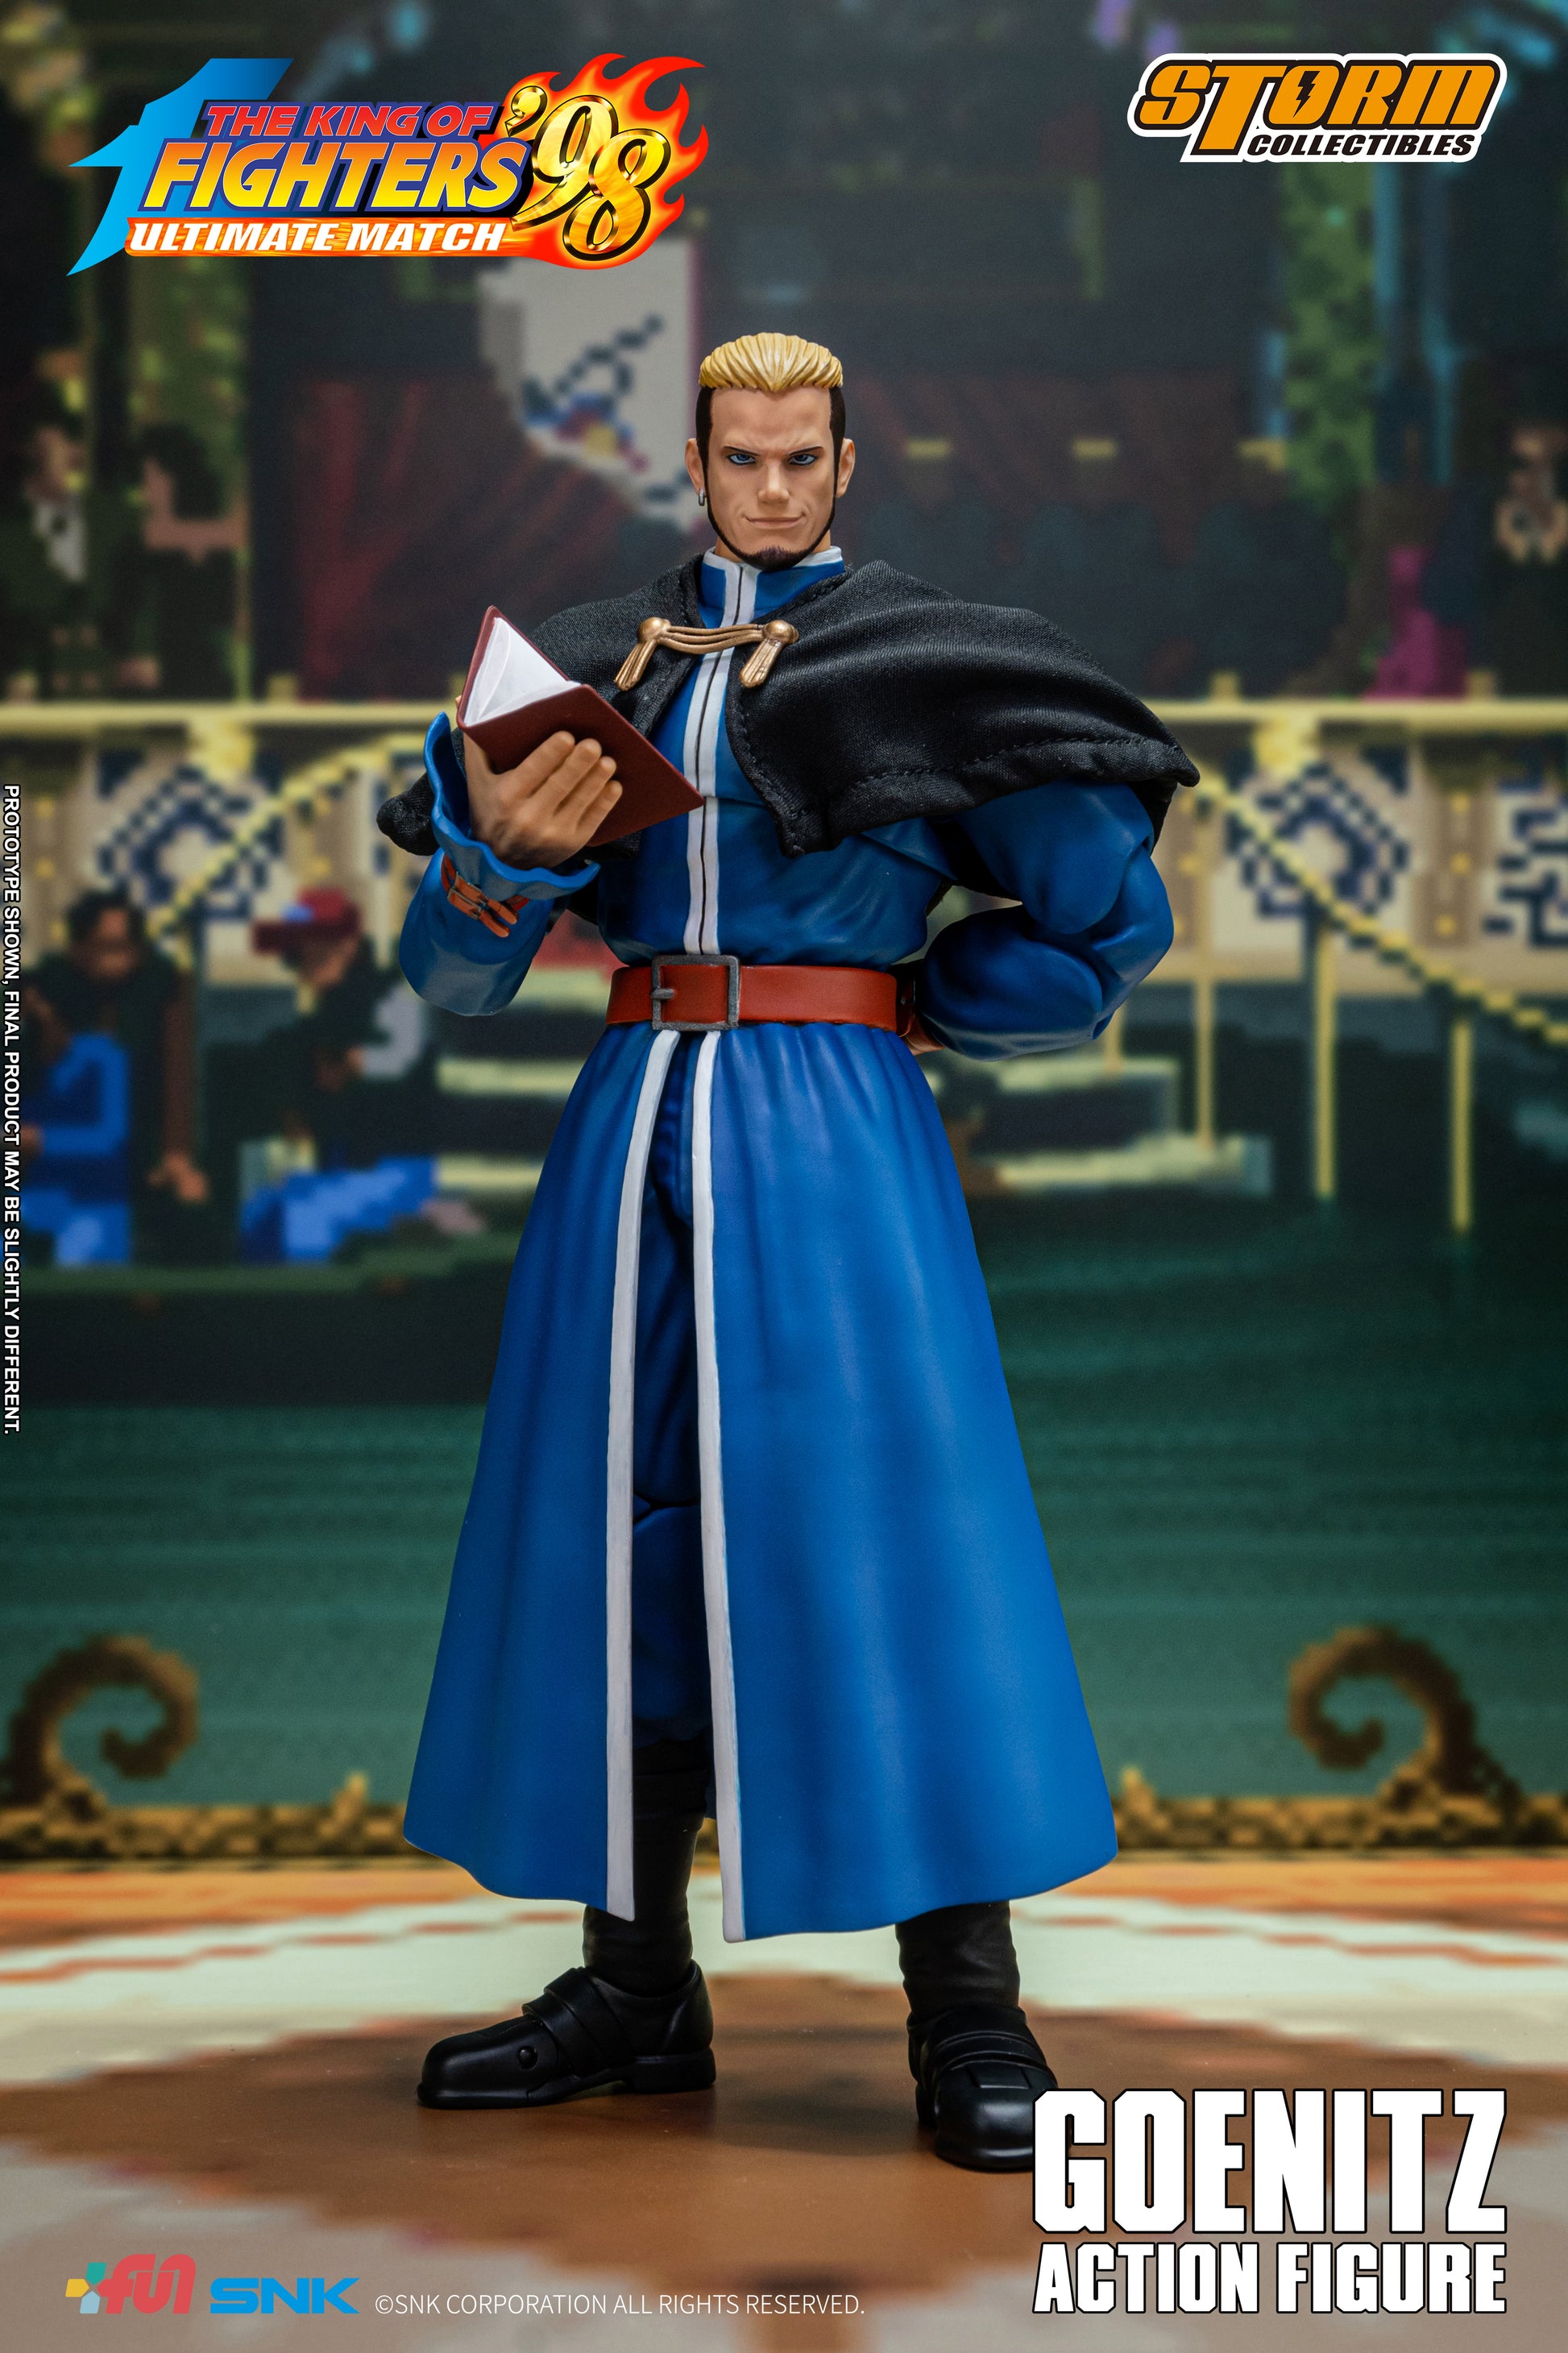 GOENITZ - The King of Fighters'98 Storm Collectibles standing pose